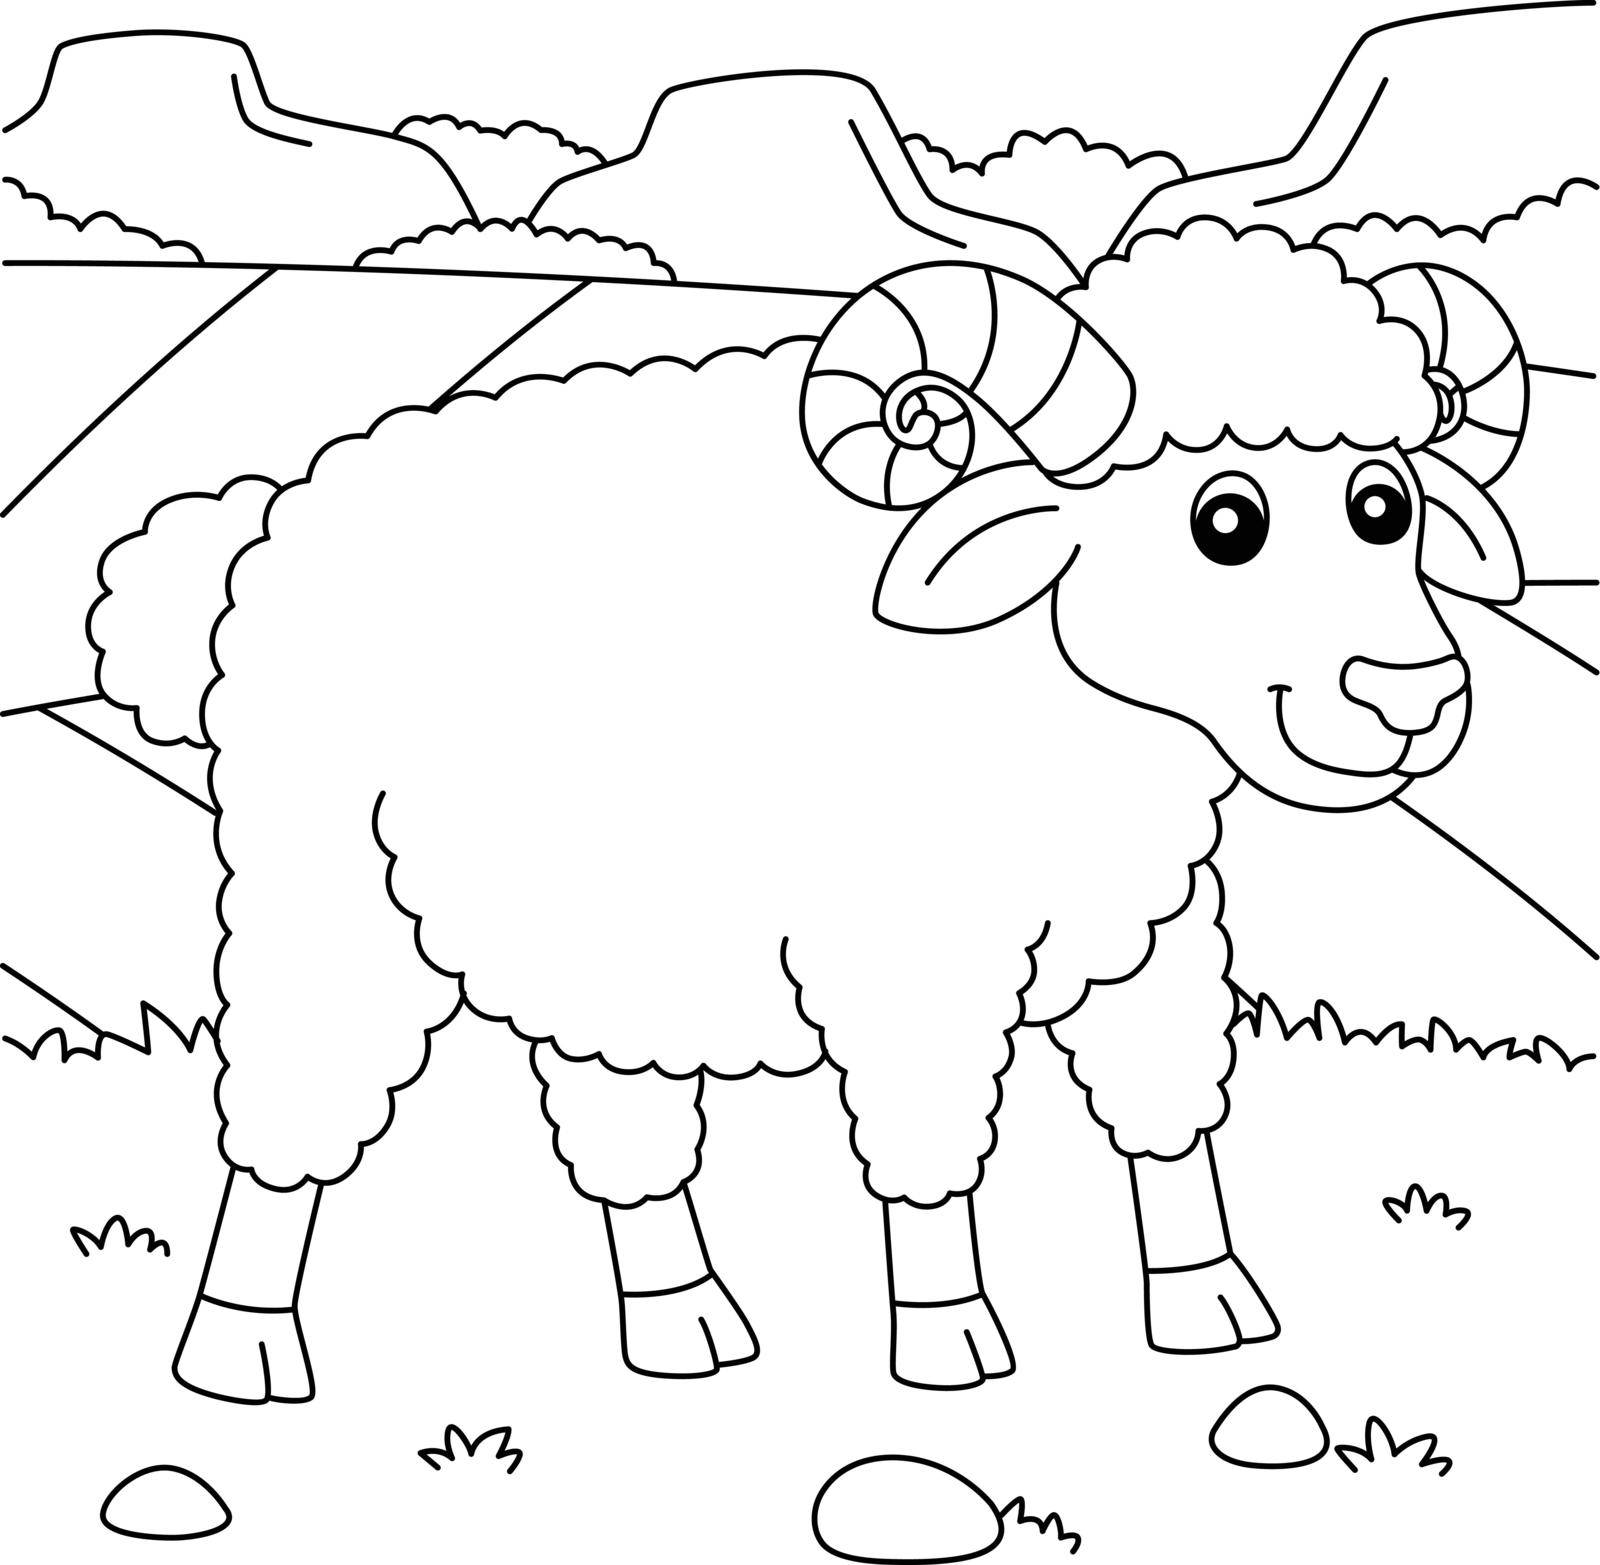 A cute and funny coloring page of a sheep. Provides hours of coloring fun for children. To color, this page is very easy. Suitable for little kids and toddlers.